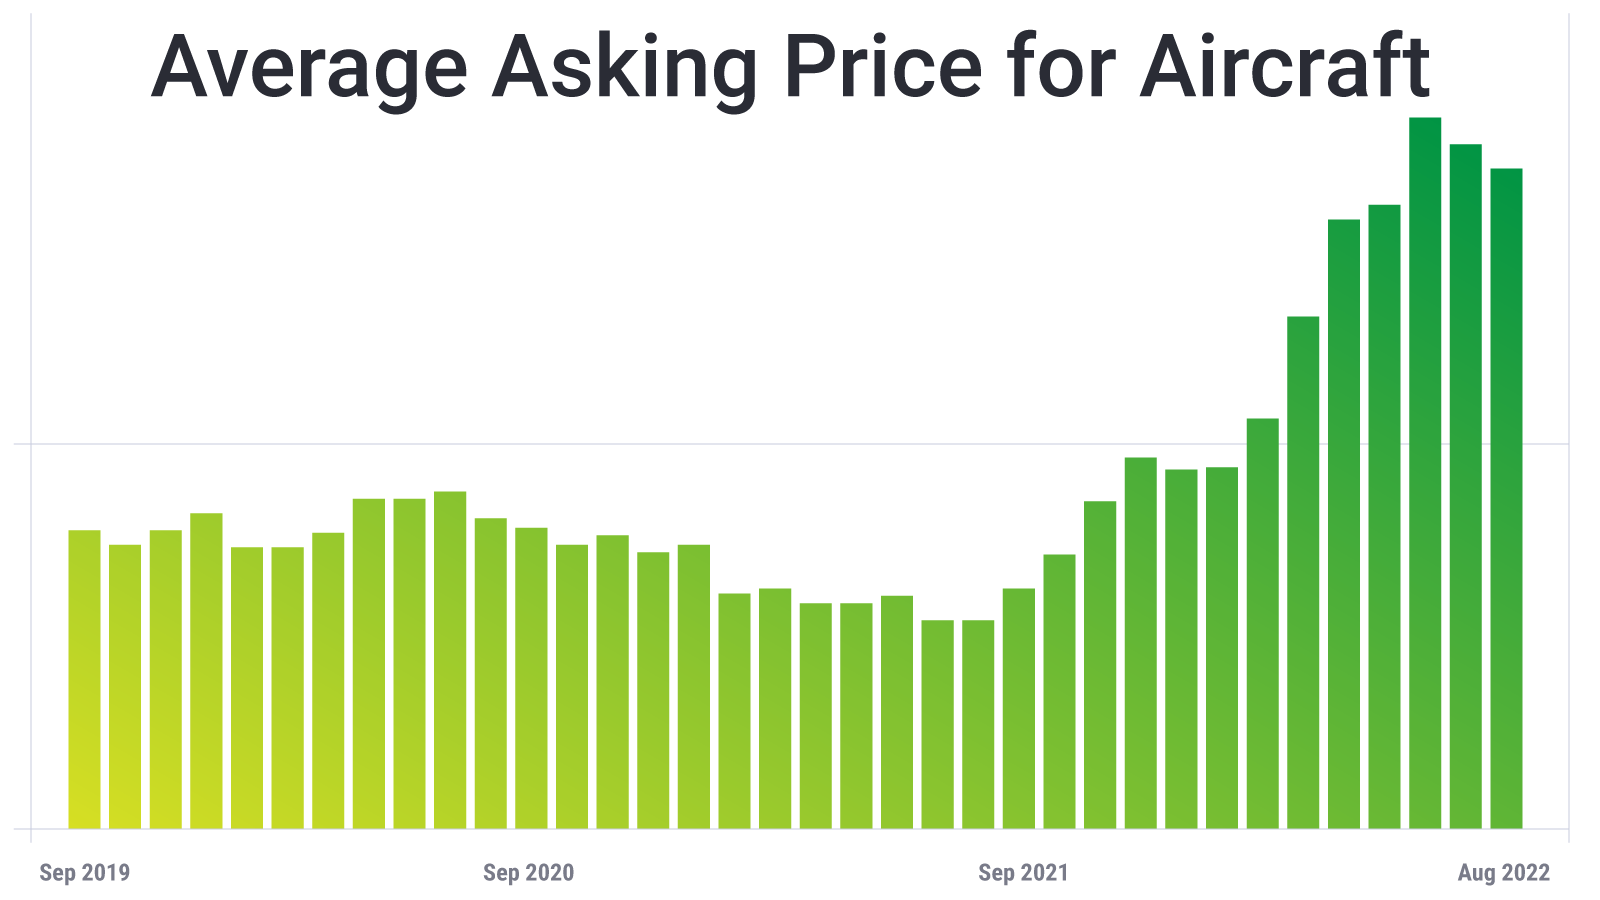 Aircraft Values Have Skyrocketed; Are You Underinsured?